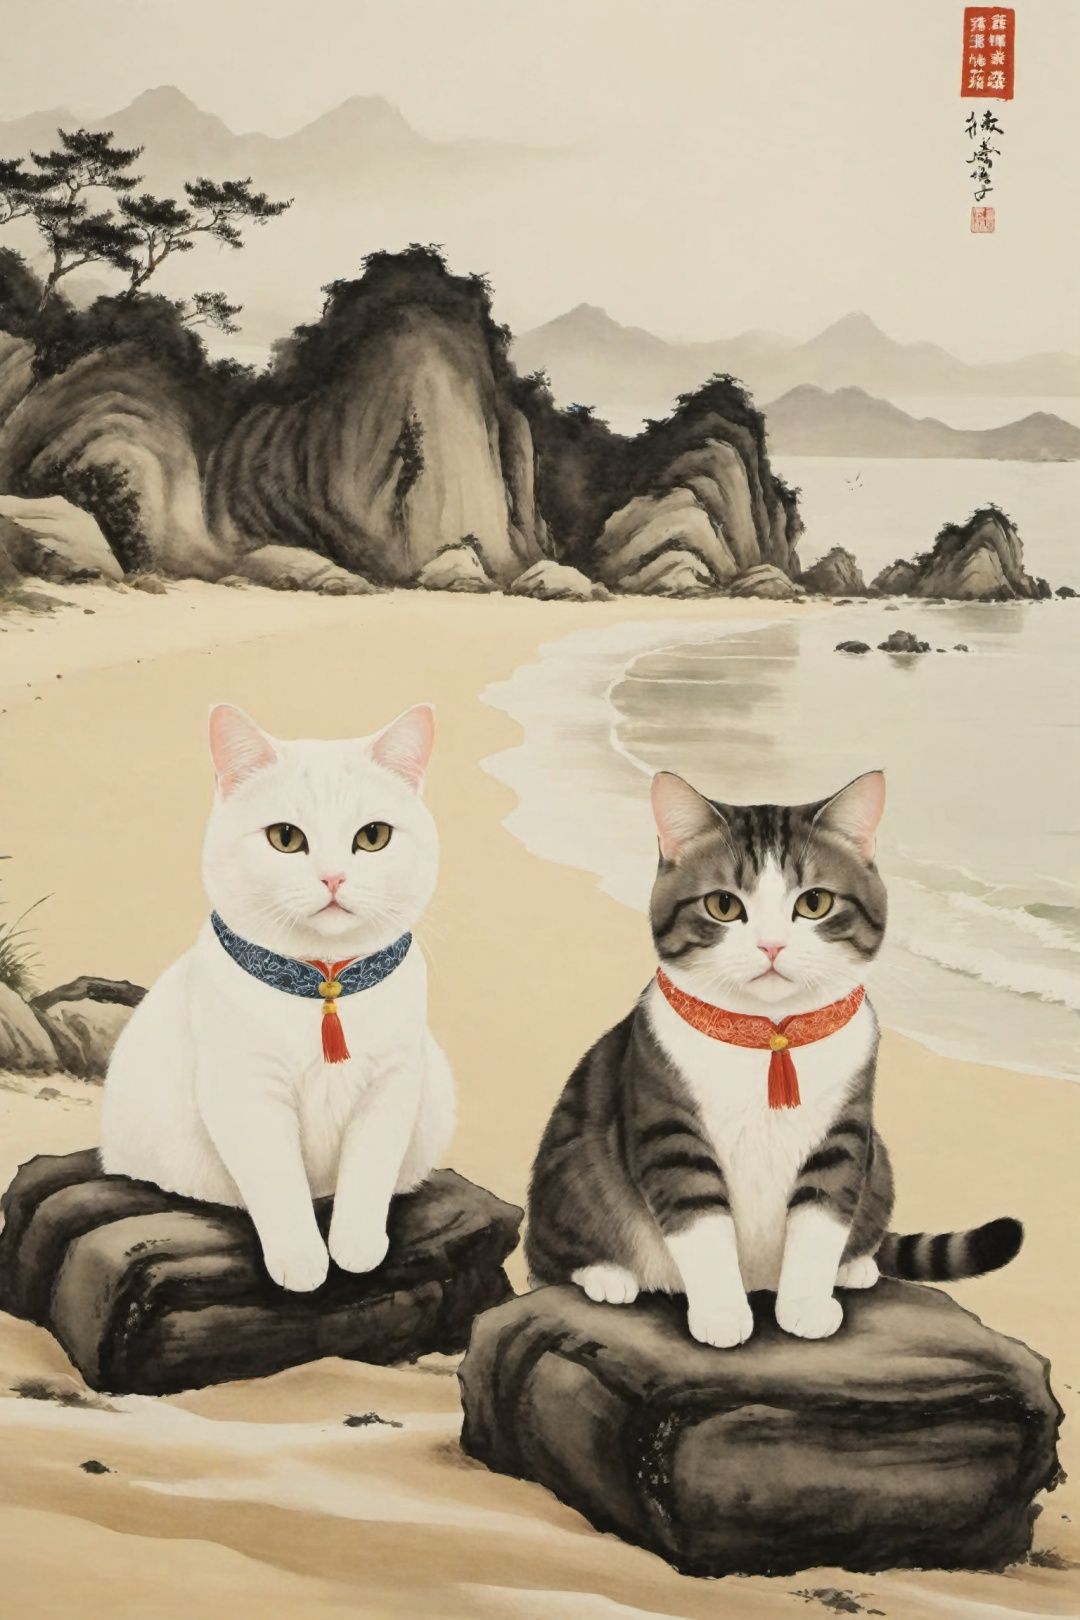  cute cats on beach, in the style of balanced symmetry, spontaneous gestures, movie still, shige's visual aesthetic style, group zero, tondo, creative commons attribution,traditional chinese ink painting